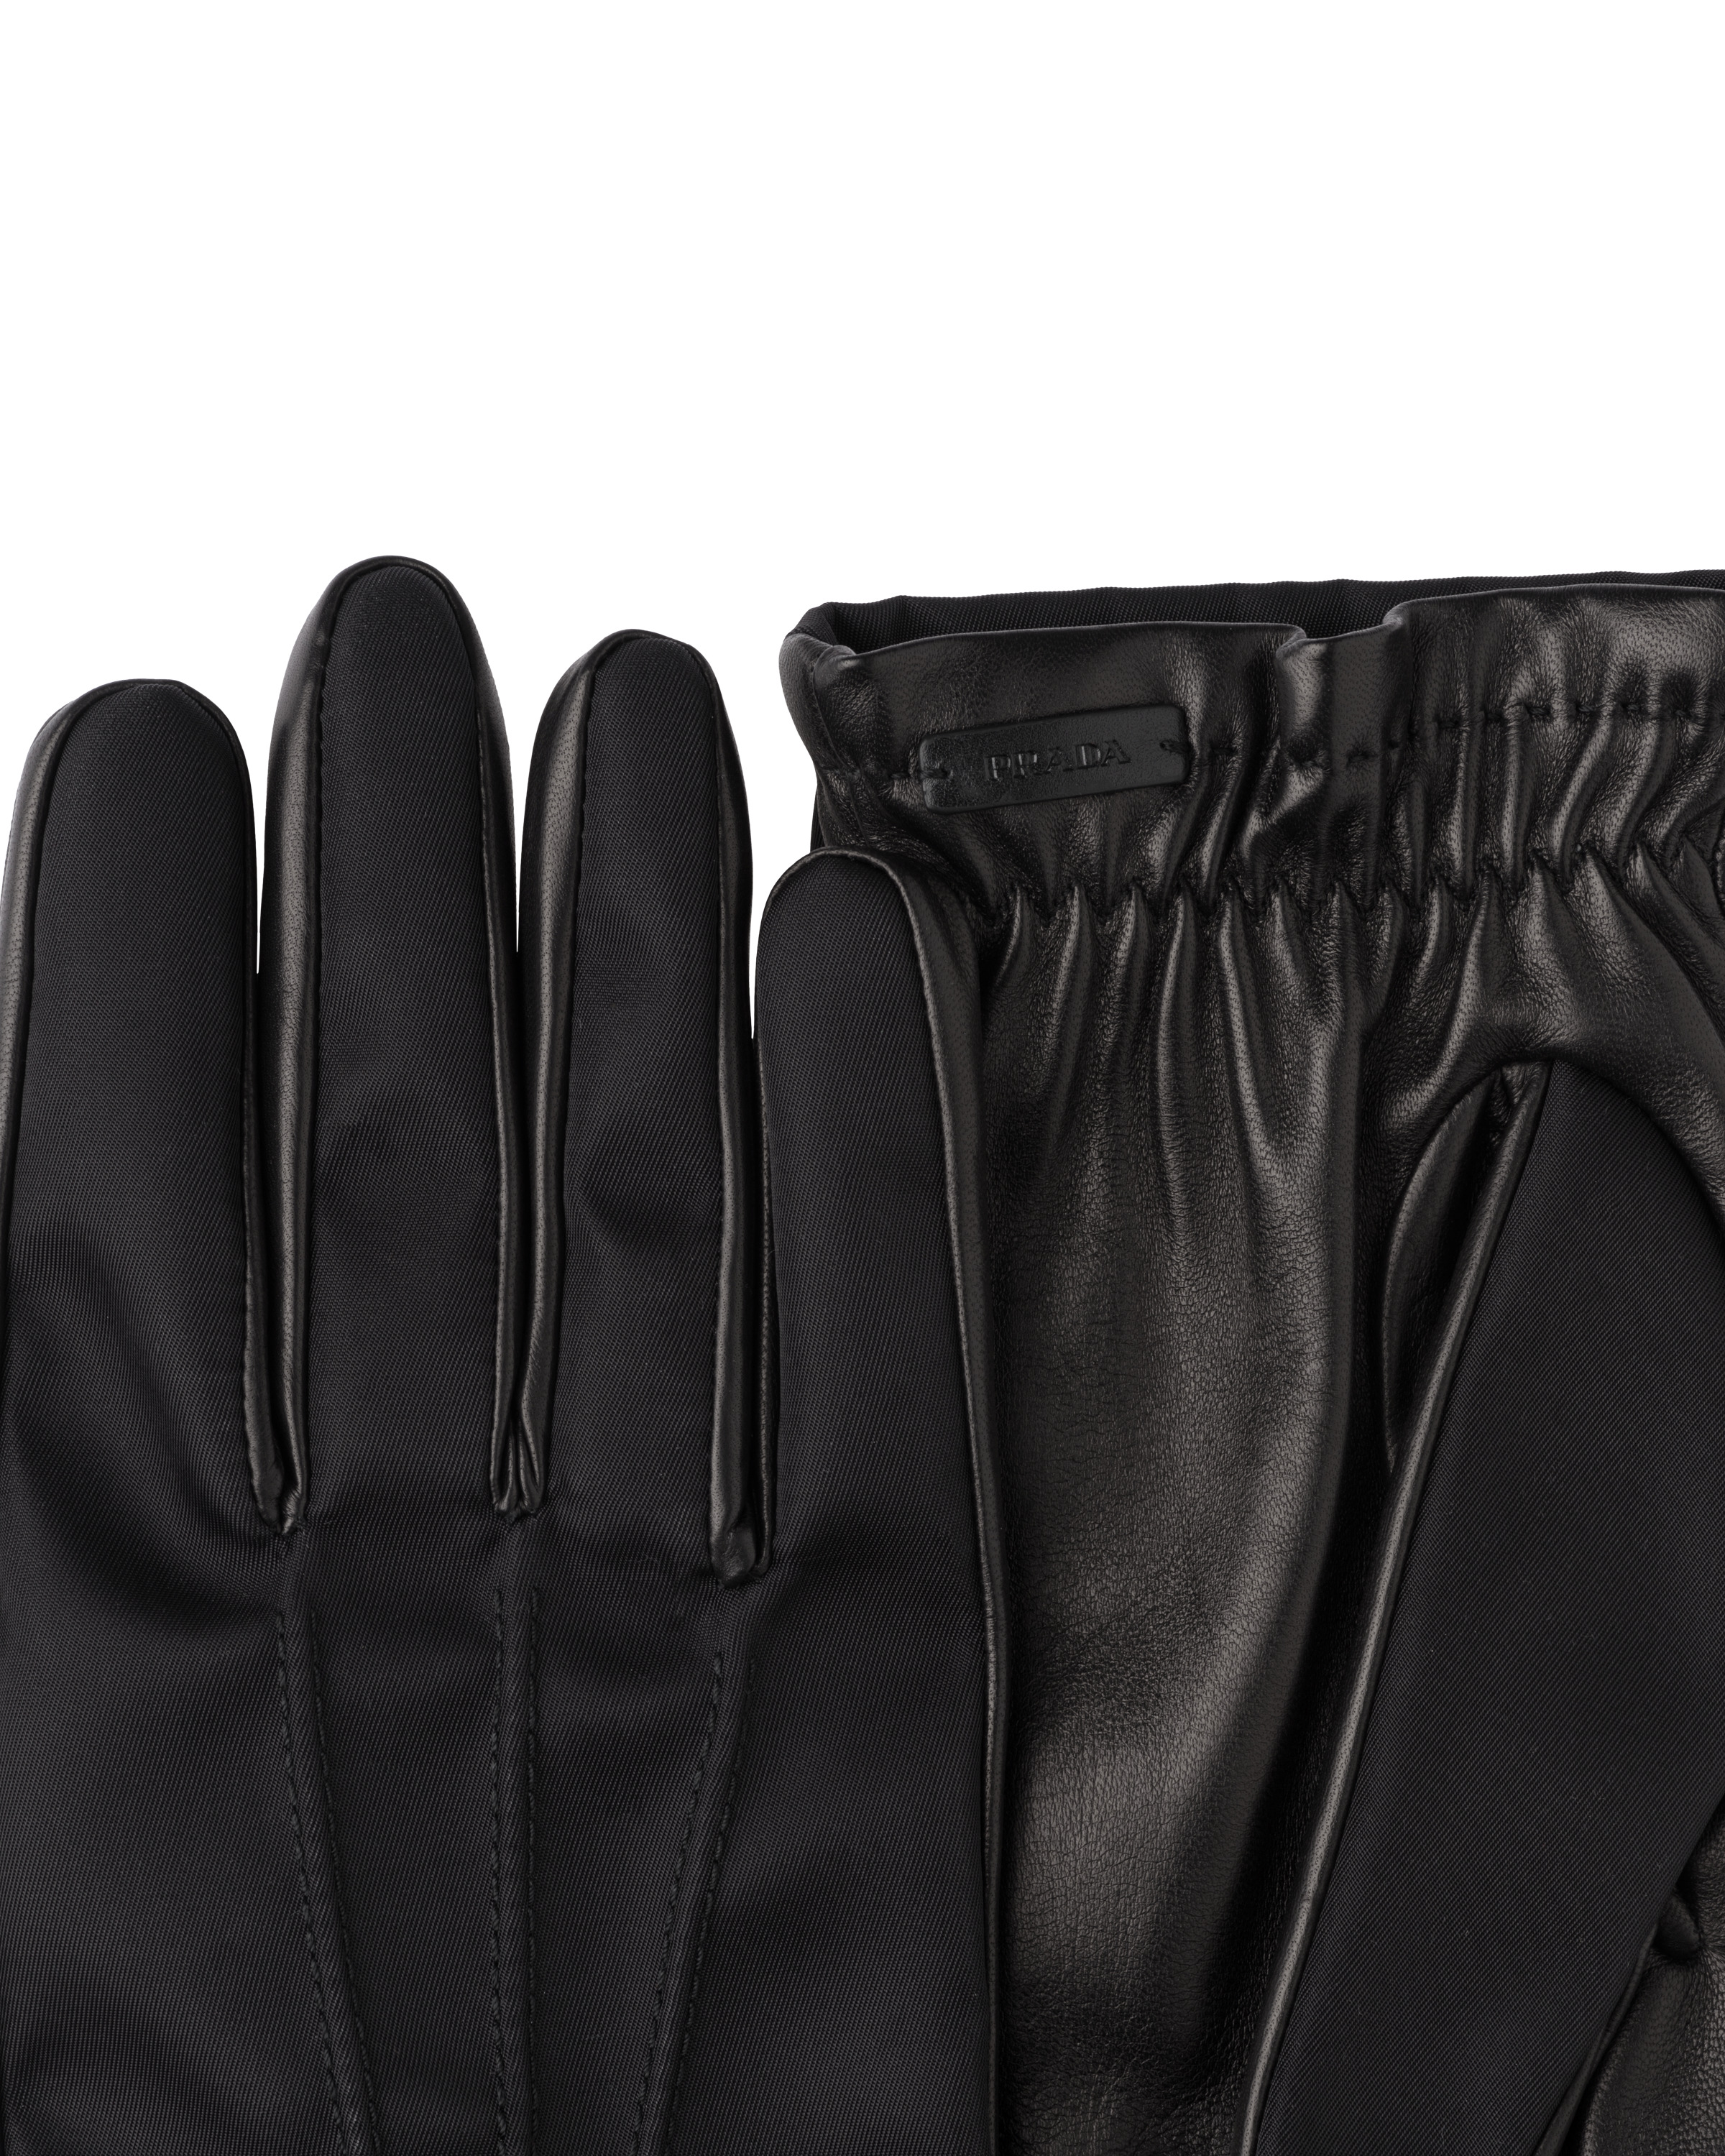 Fabric and leather gloves - 2